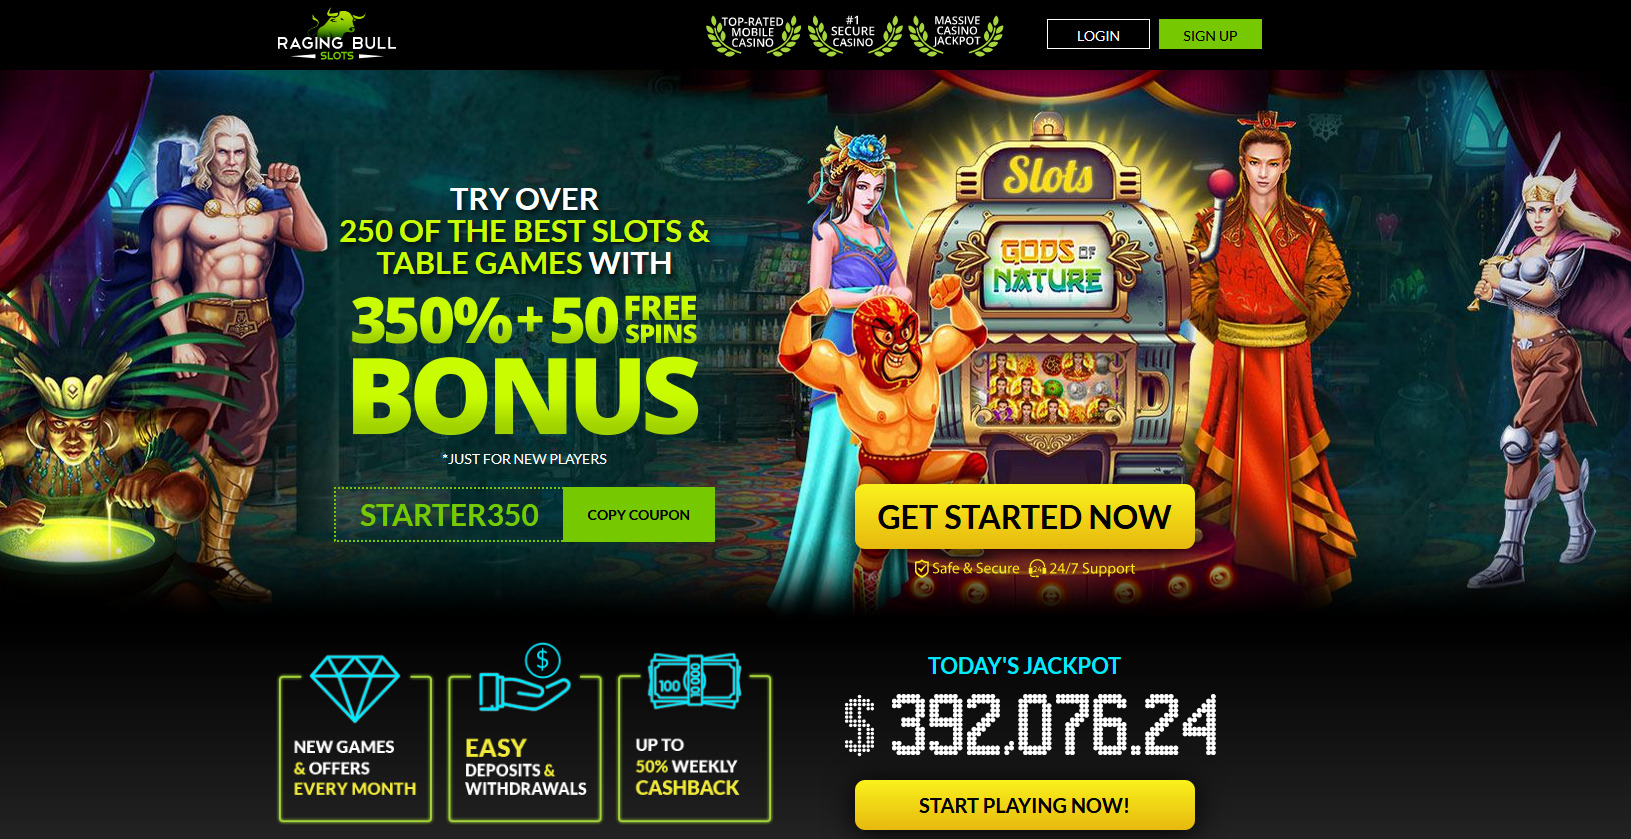 TRY OVER 250 OF THE BEST SLOTS & TABLE GAMES WITH 350% Bonus + 50 Free Spins Bonus  *JUST FOR NEW PLAYERS